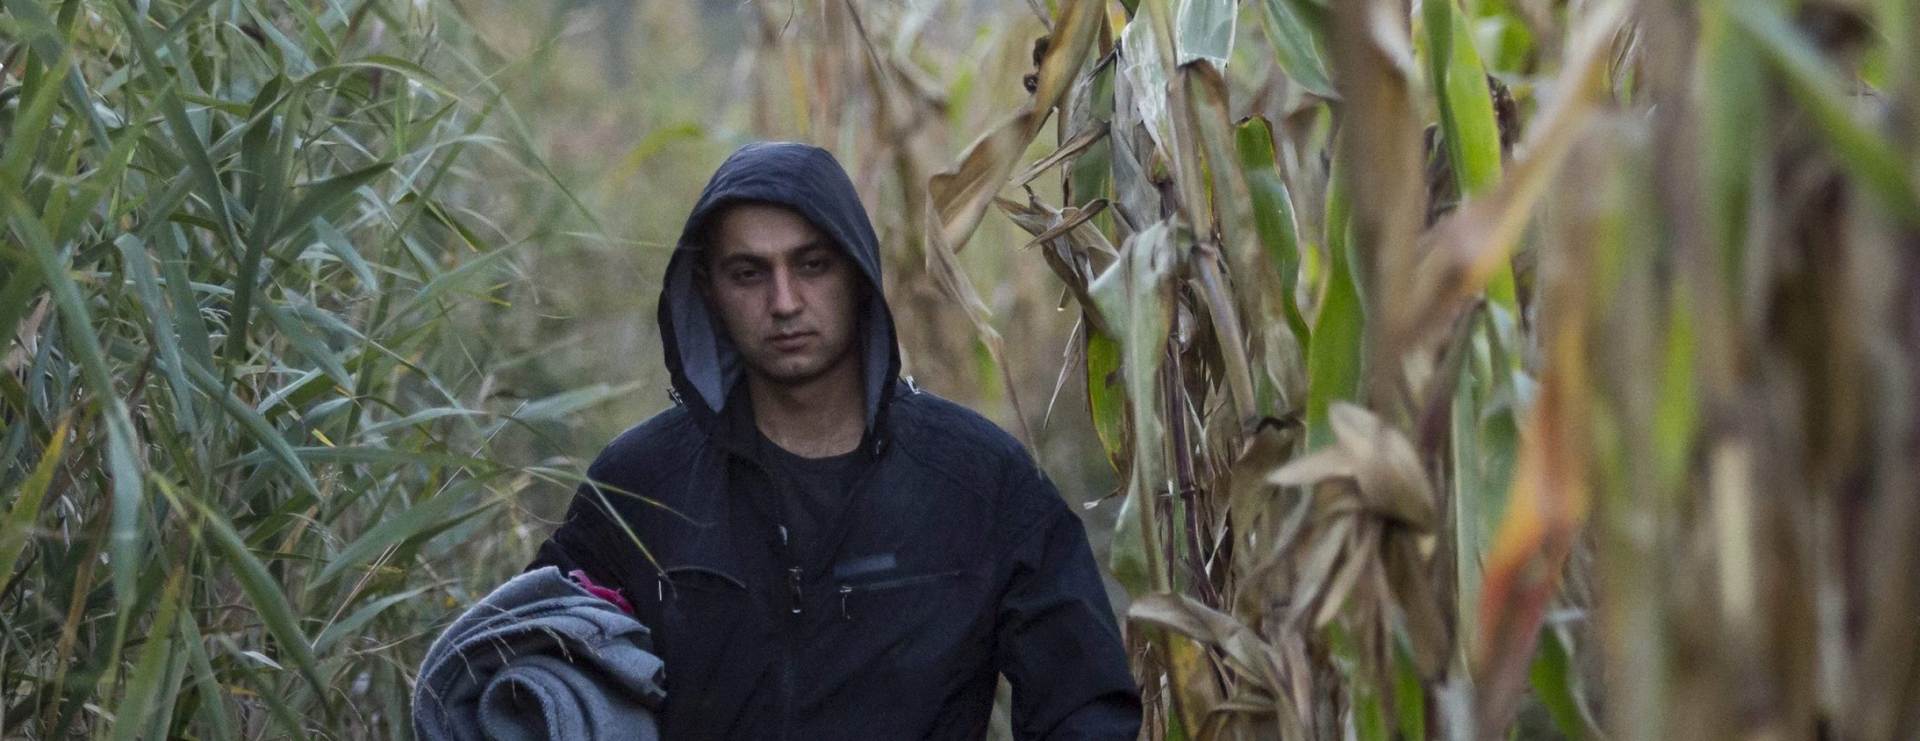 epa04928348 A migrant walks through a plantation to avoid checkpoints along the railway tracks connecting Horgos and Szeged near Roszke, near the border between Hungary and Serbia, 12 September 2015. Hungarian Prime Minister Viktor Orban warned 11 September that anyone trespassing his country's border with Serbia starting next week would be 'immediately arrested,' and slammed Greece for not doing enough to protect its frontiers.  EPA/BALAZS MOHAI HUNGARY OUT